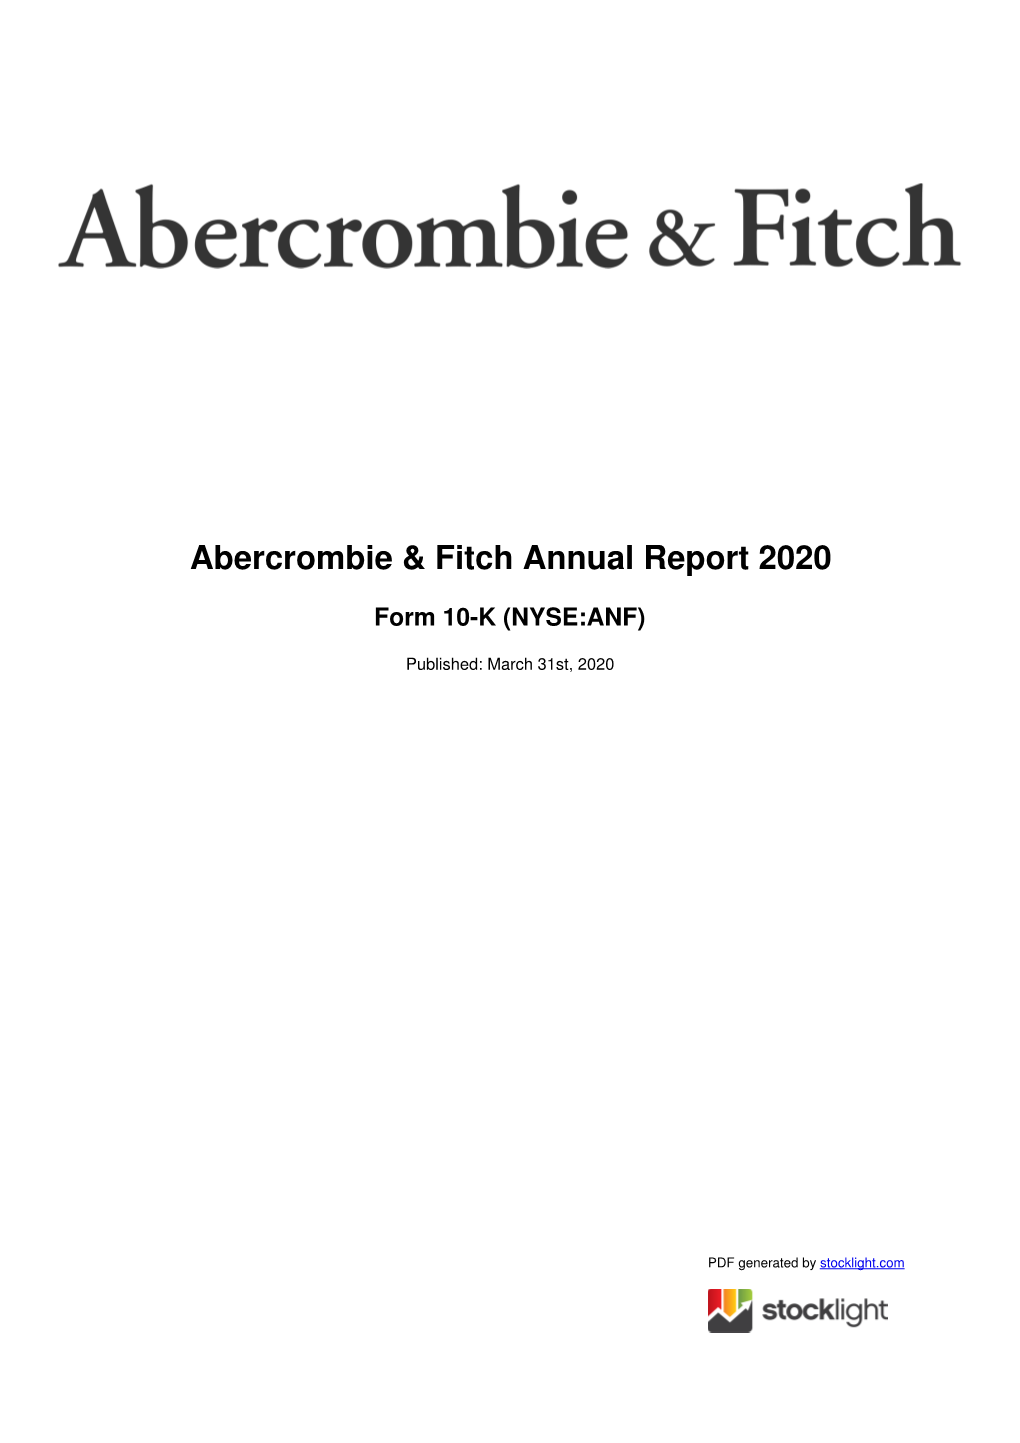 Abercrombie & Fitch Annual Report 2020